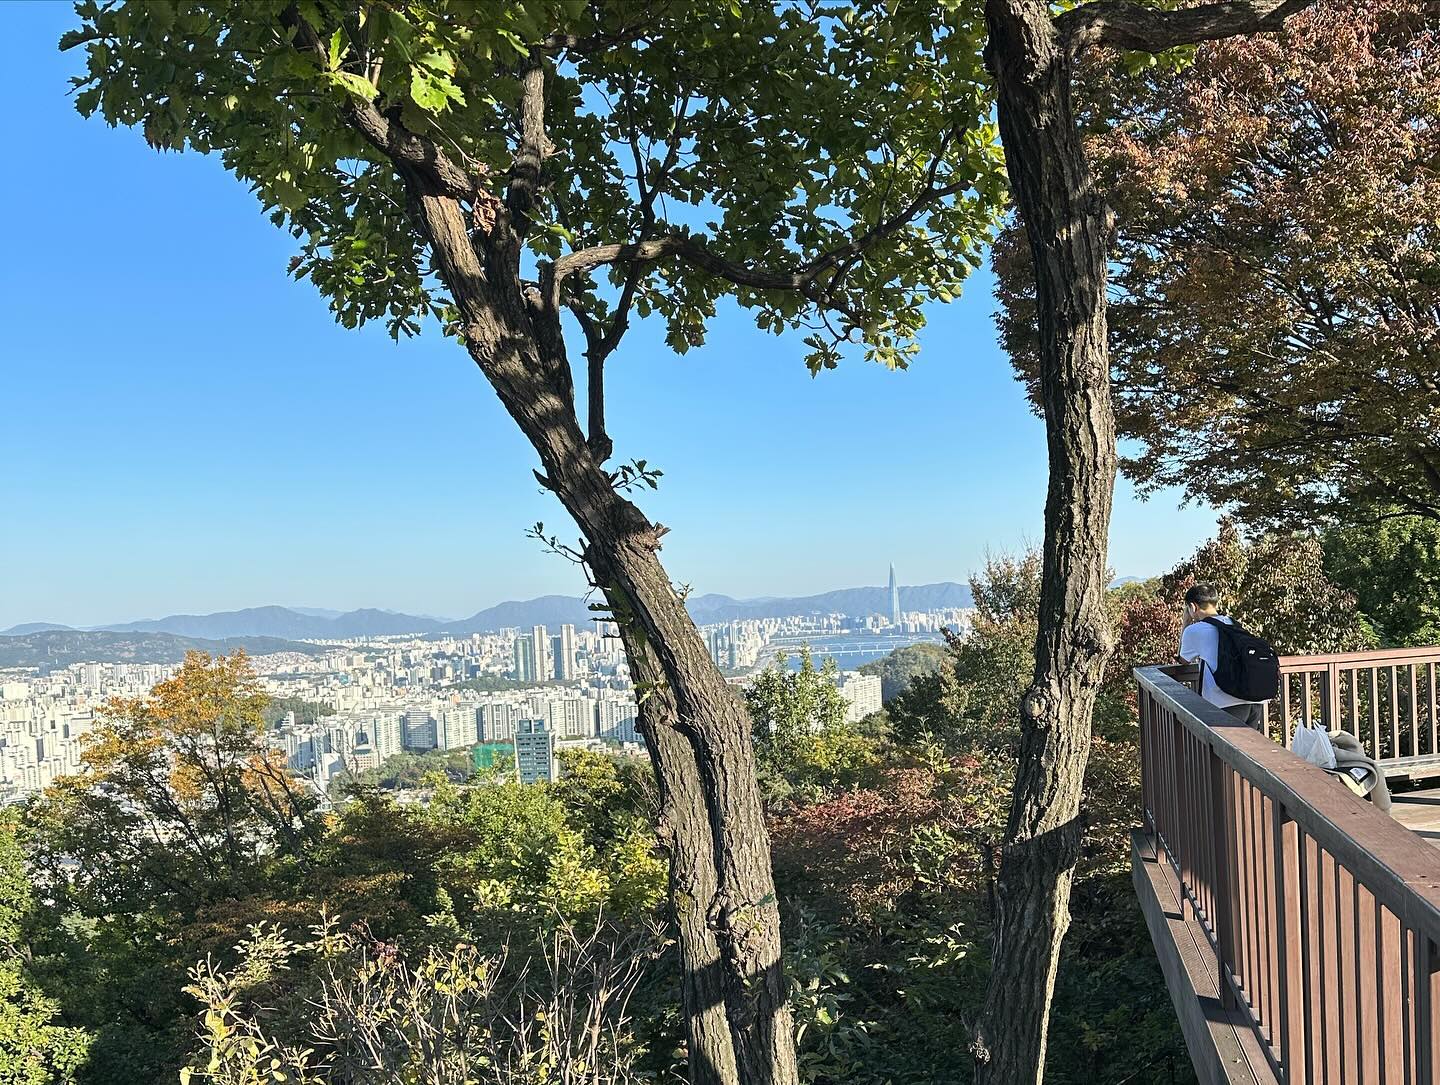 Some more cool photos in Namsan